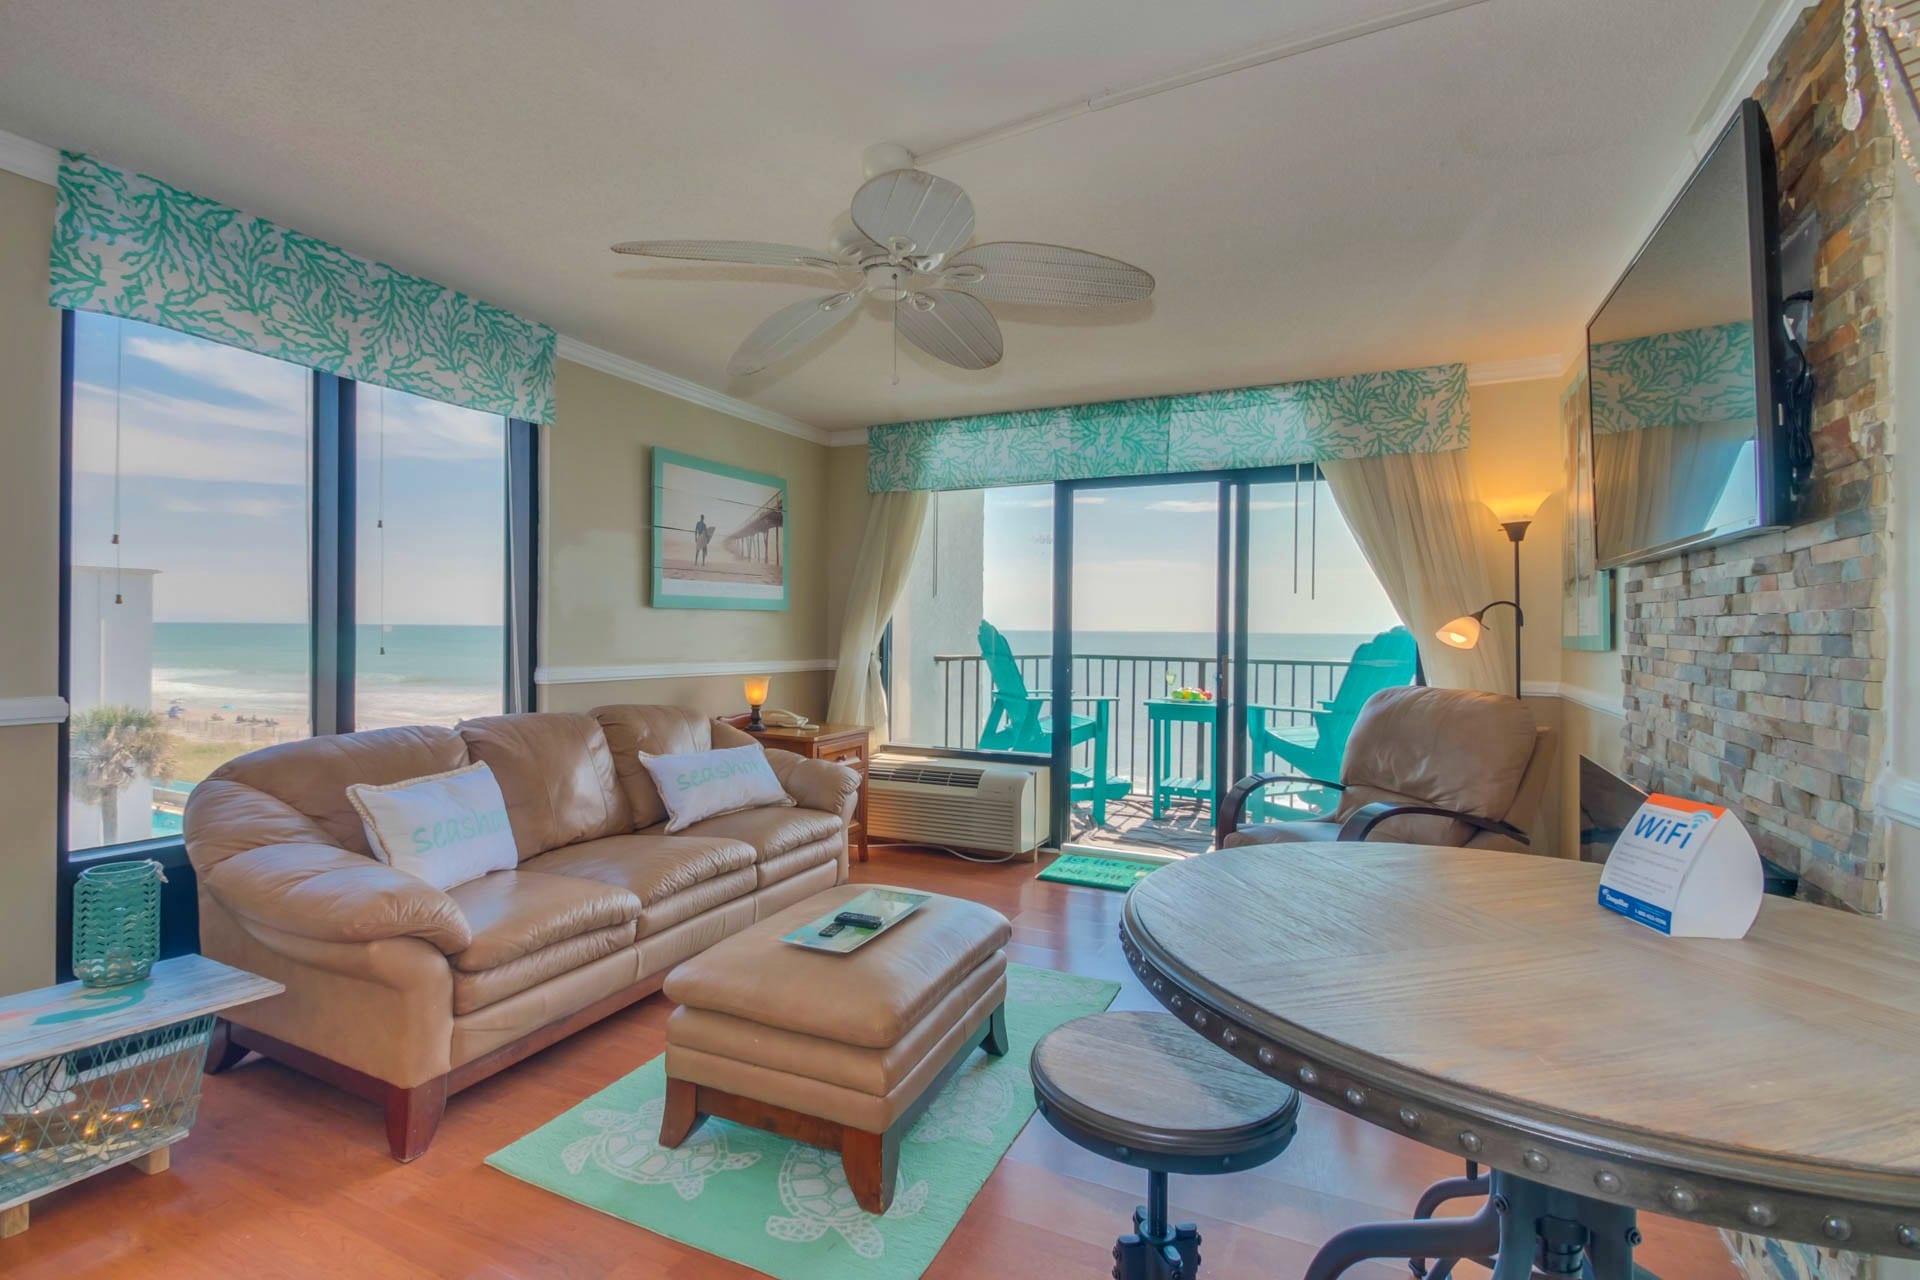 A beach suite with aqua colored touches